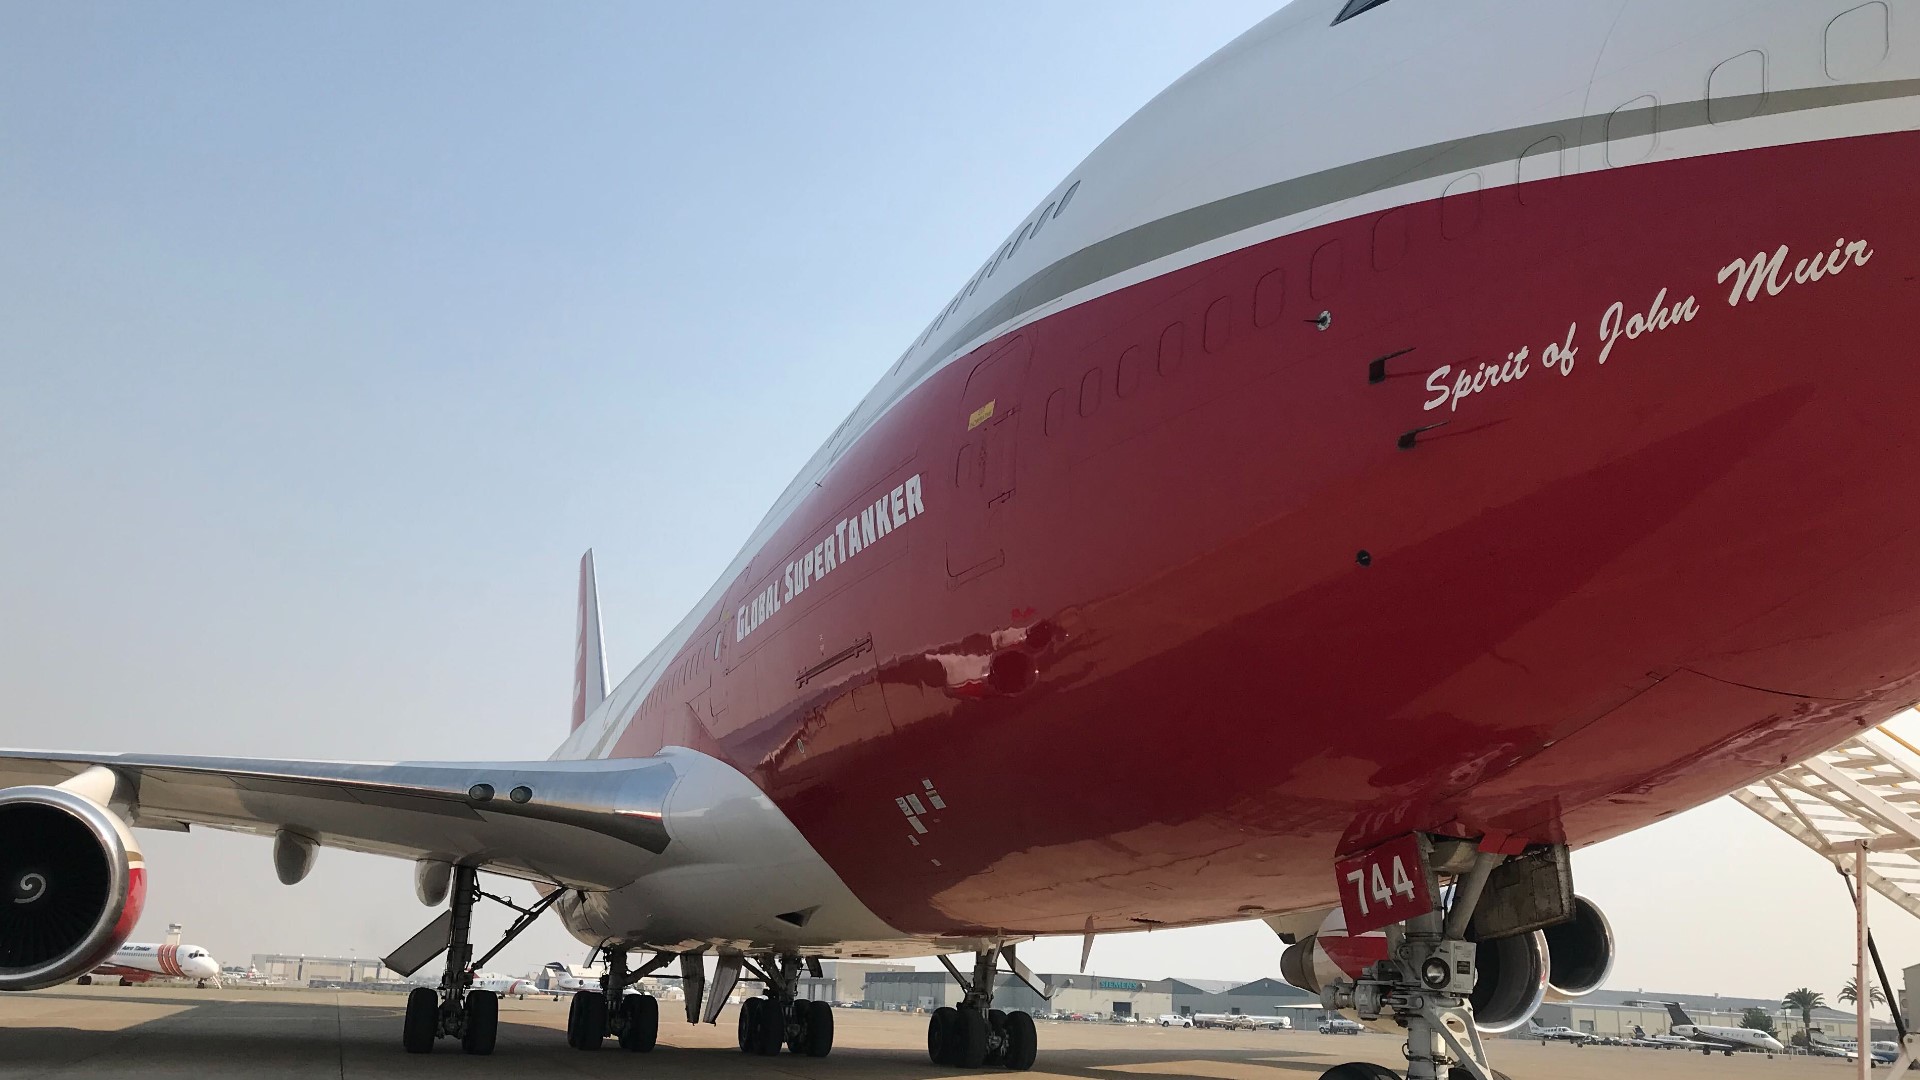 The largest firefighting aircraft in the world, capable of dropping 19,000 gallons with the push of a button, is helping battle wildfires in California.